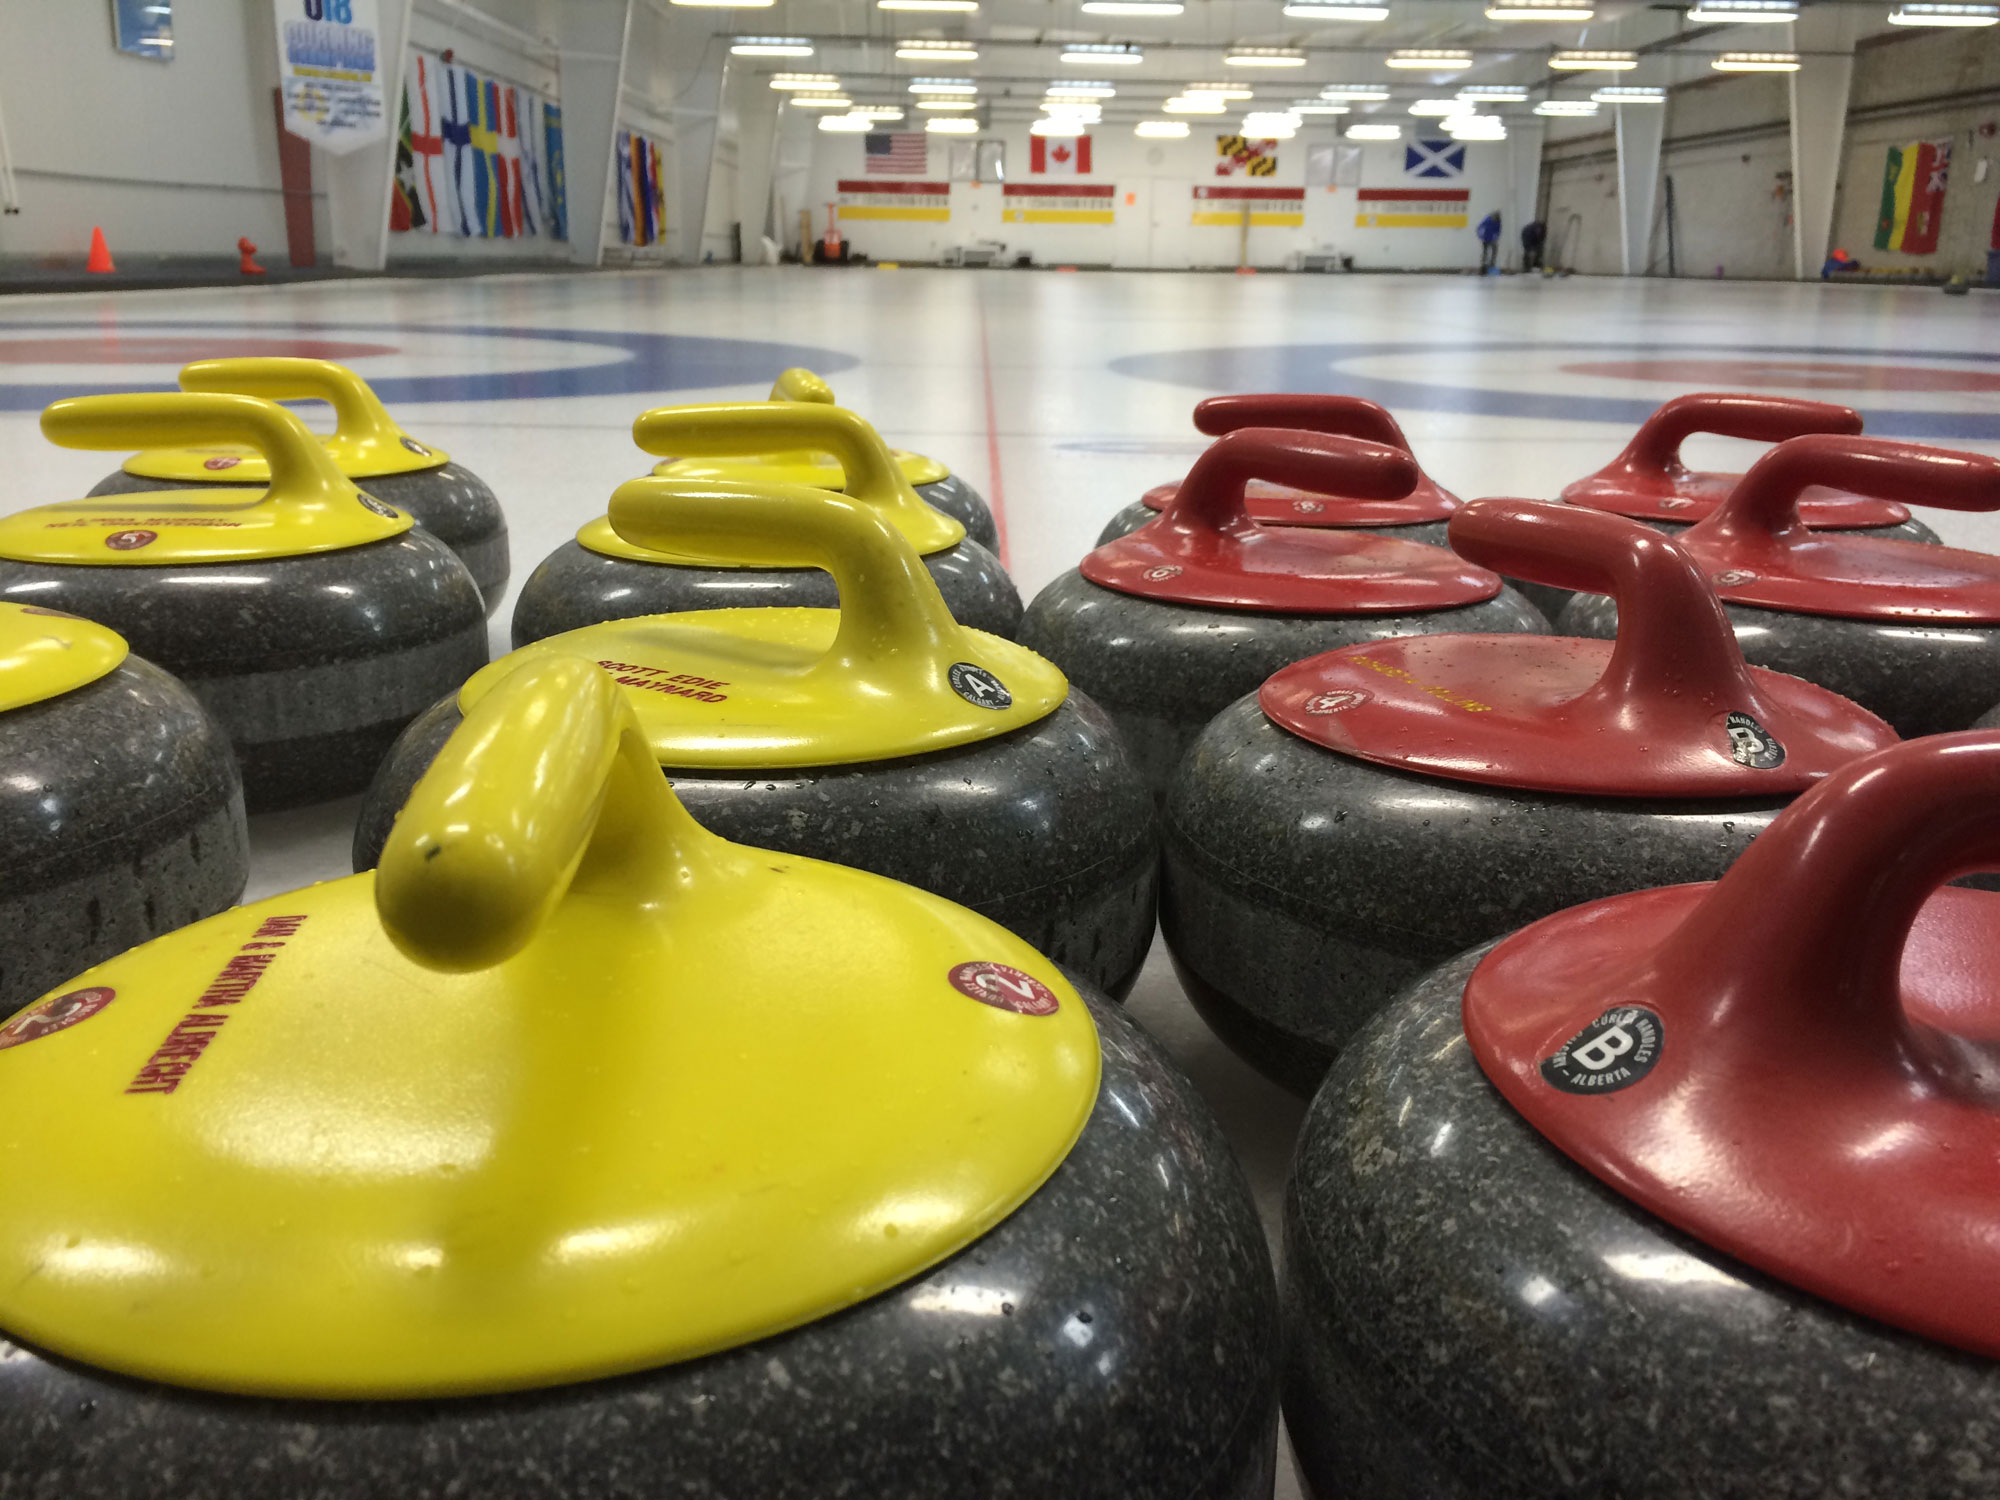 Your personal crash course in curling